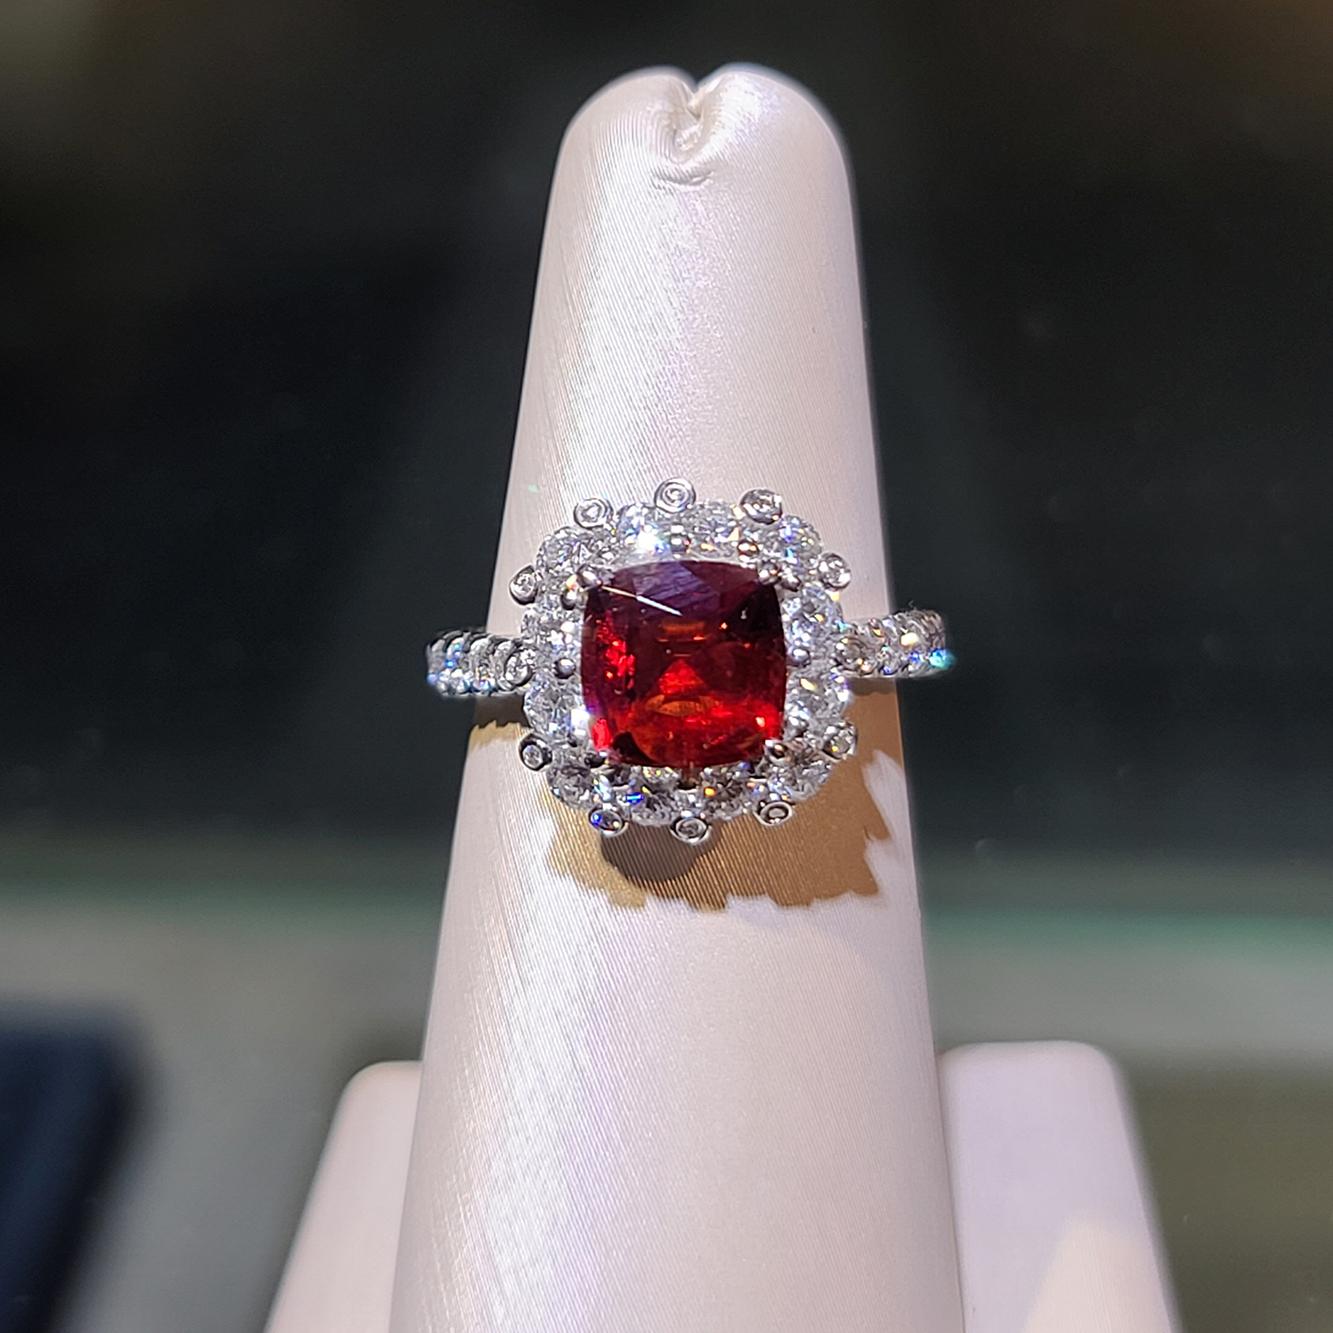 1 SPIN - 1.85 ct  Lotus 6690-0609   Vivid Red / No Heat / Burma
Carat Weight: 1.85 ct  / Shape and cut: Antique Cushion / Faceted
Colour: Vivid Red  
Treatment: No Heat 
Origin: Burma
Cert: Lotus 6690-0609
Total Diamond Weight: 1.38ct / Dia 44 pcs